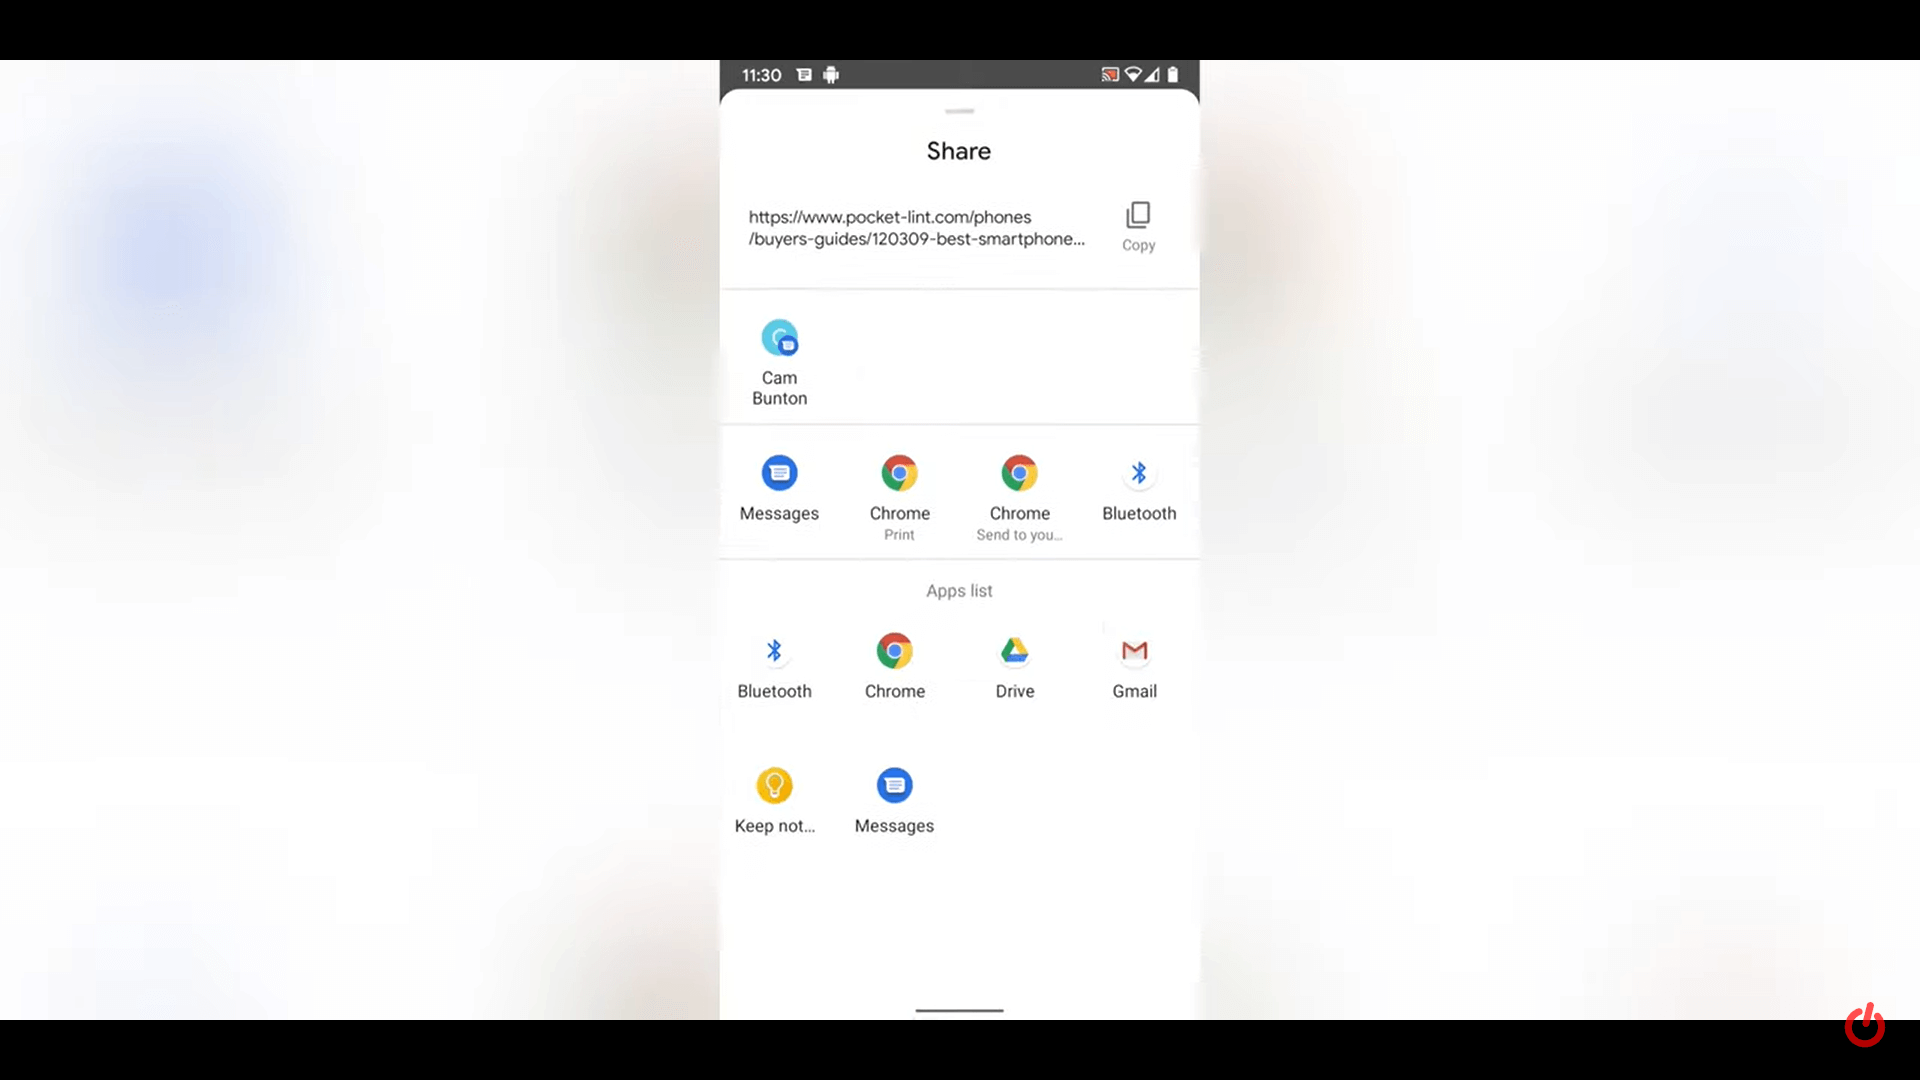 Android 11s features App pinning in the share menu